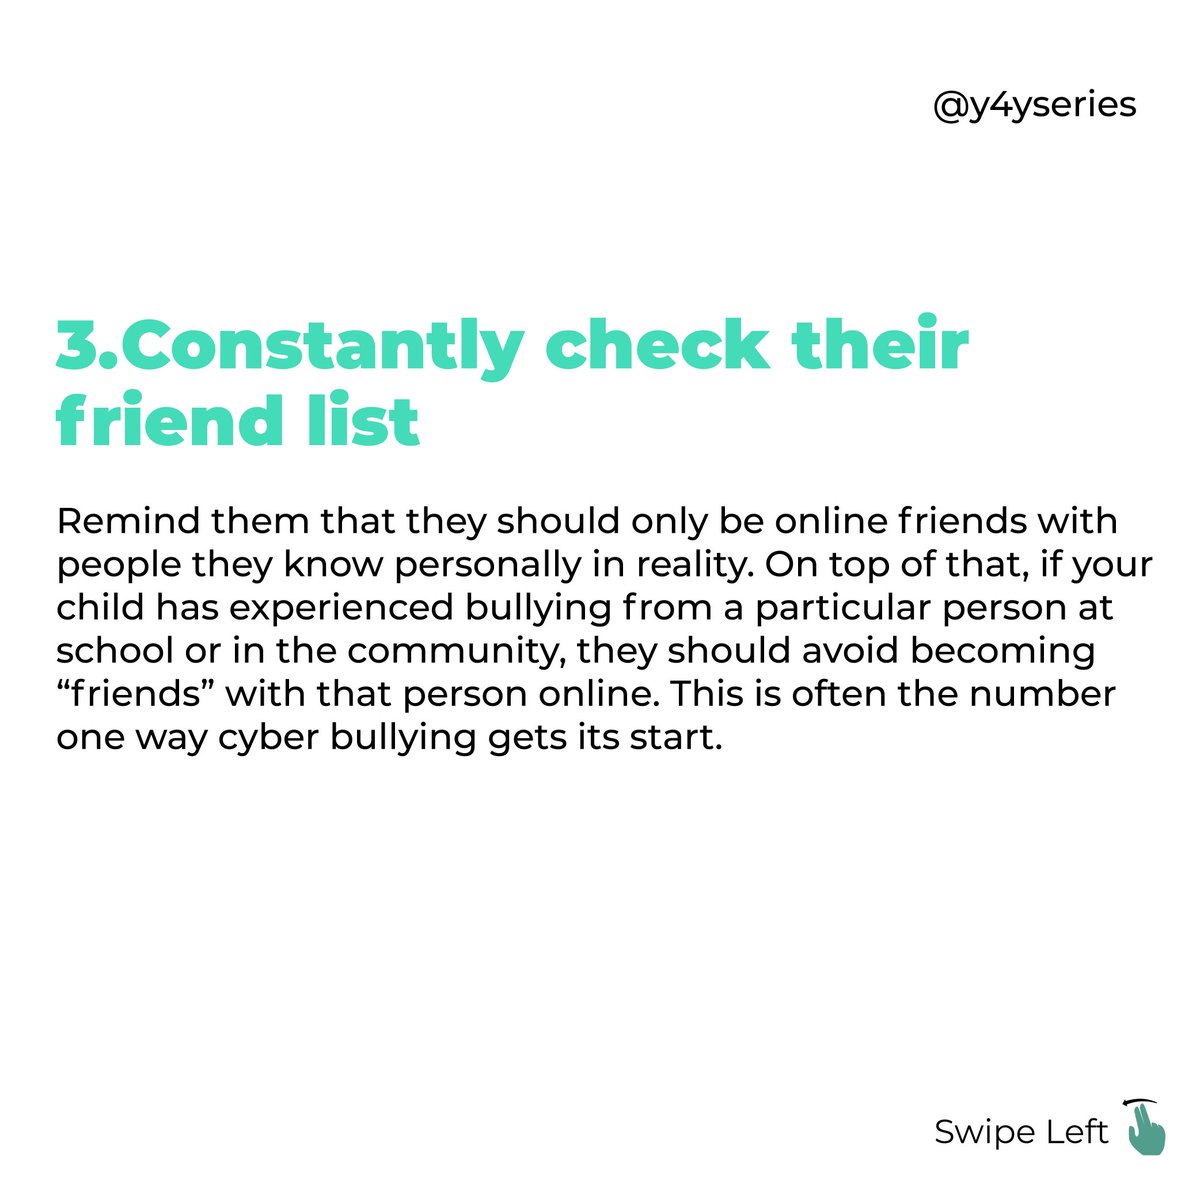 Constantly check their friend list:If your child has experienced bullying from a particular person at school or in the community, they should avoid becoming “friends” with that person online. This is often the number one way cyberbullying gets its start.⁣